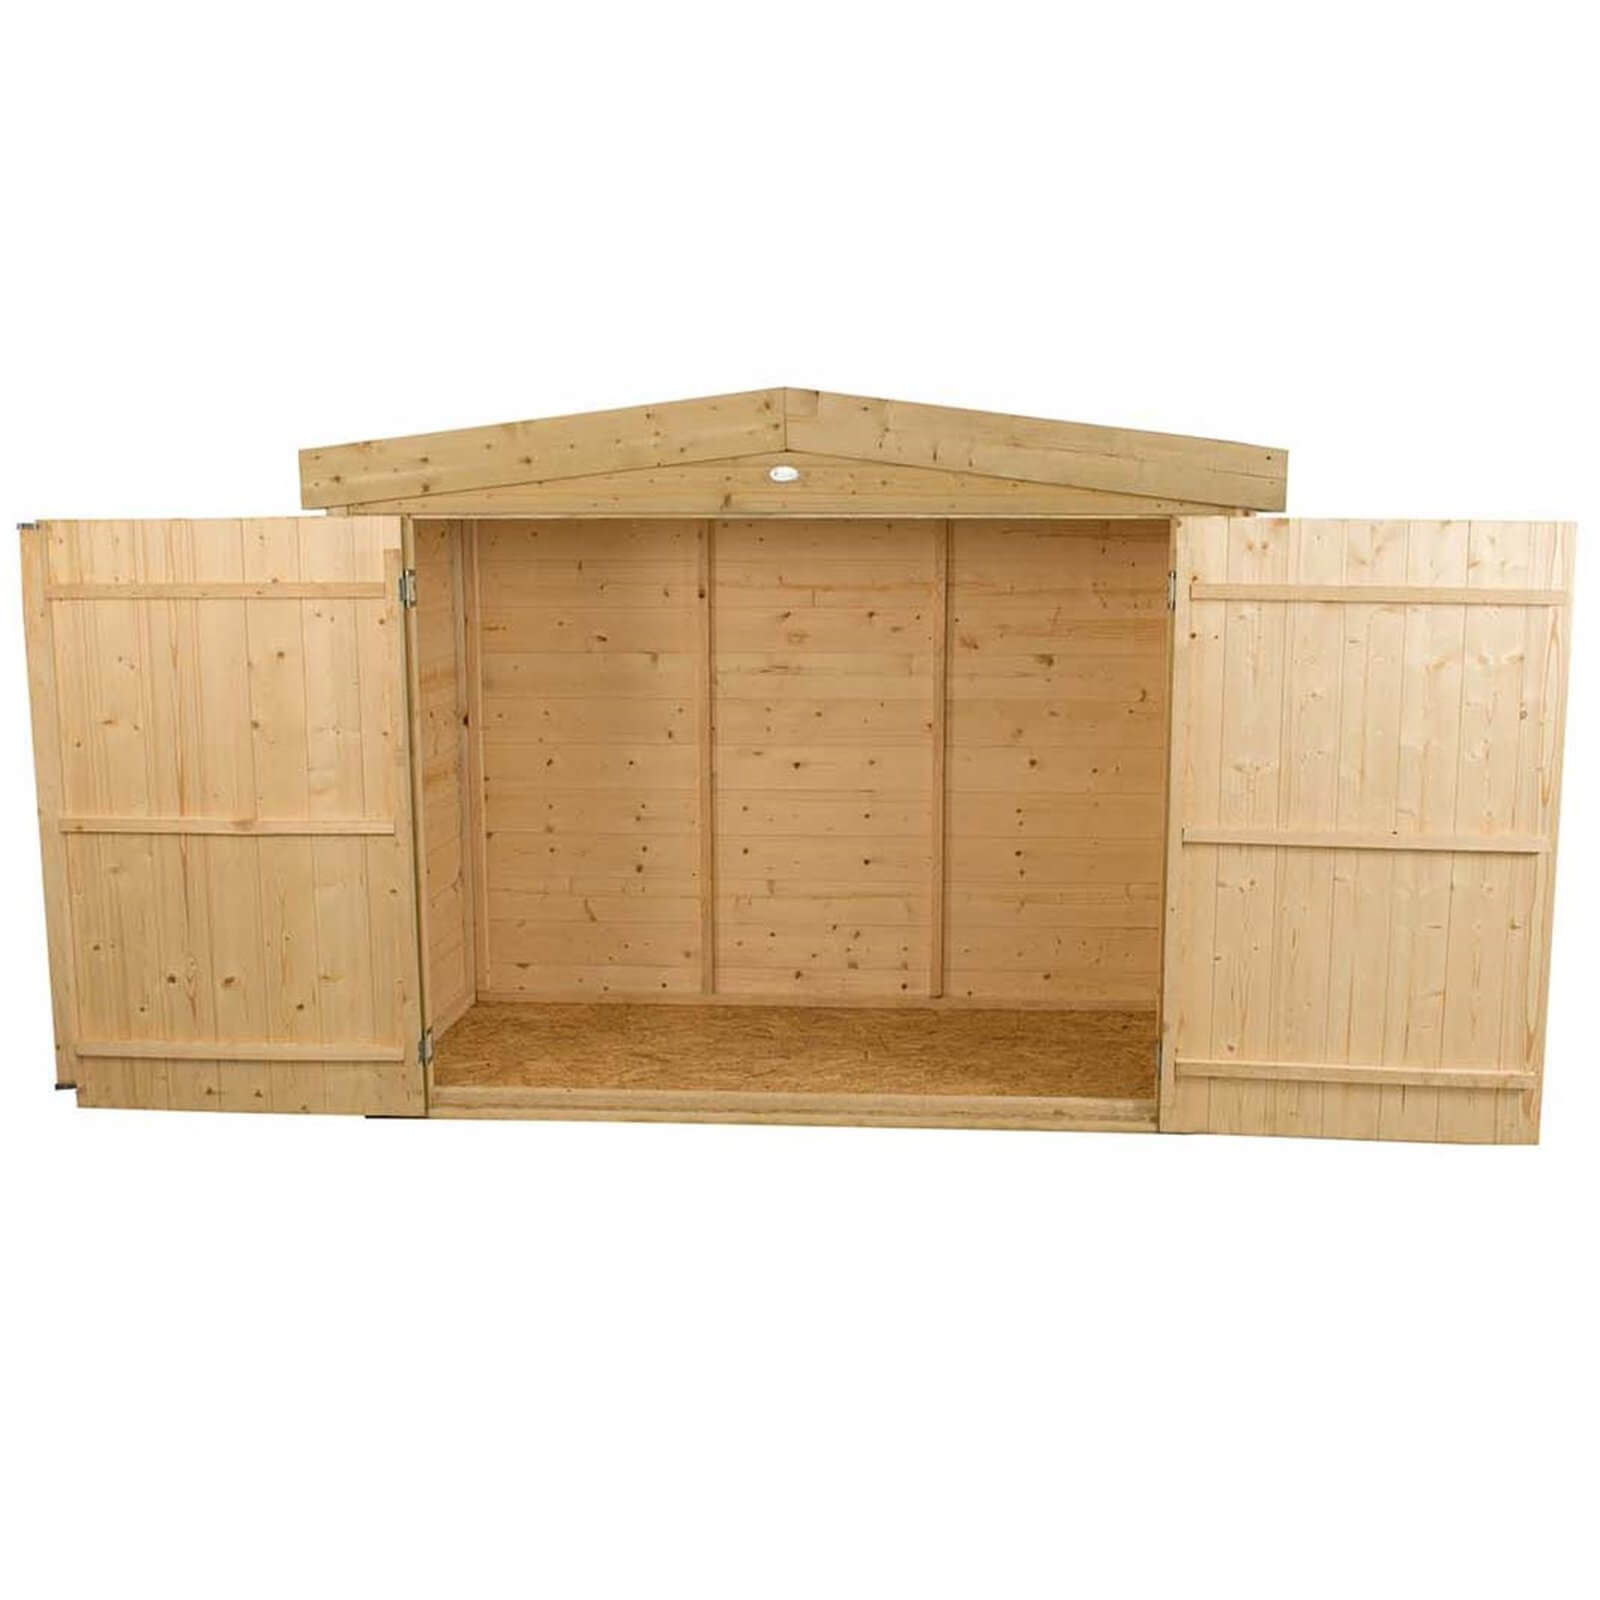 Forest Garden Large Wooden Shiplap Apex Outdoor Store